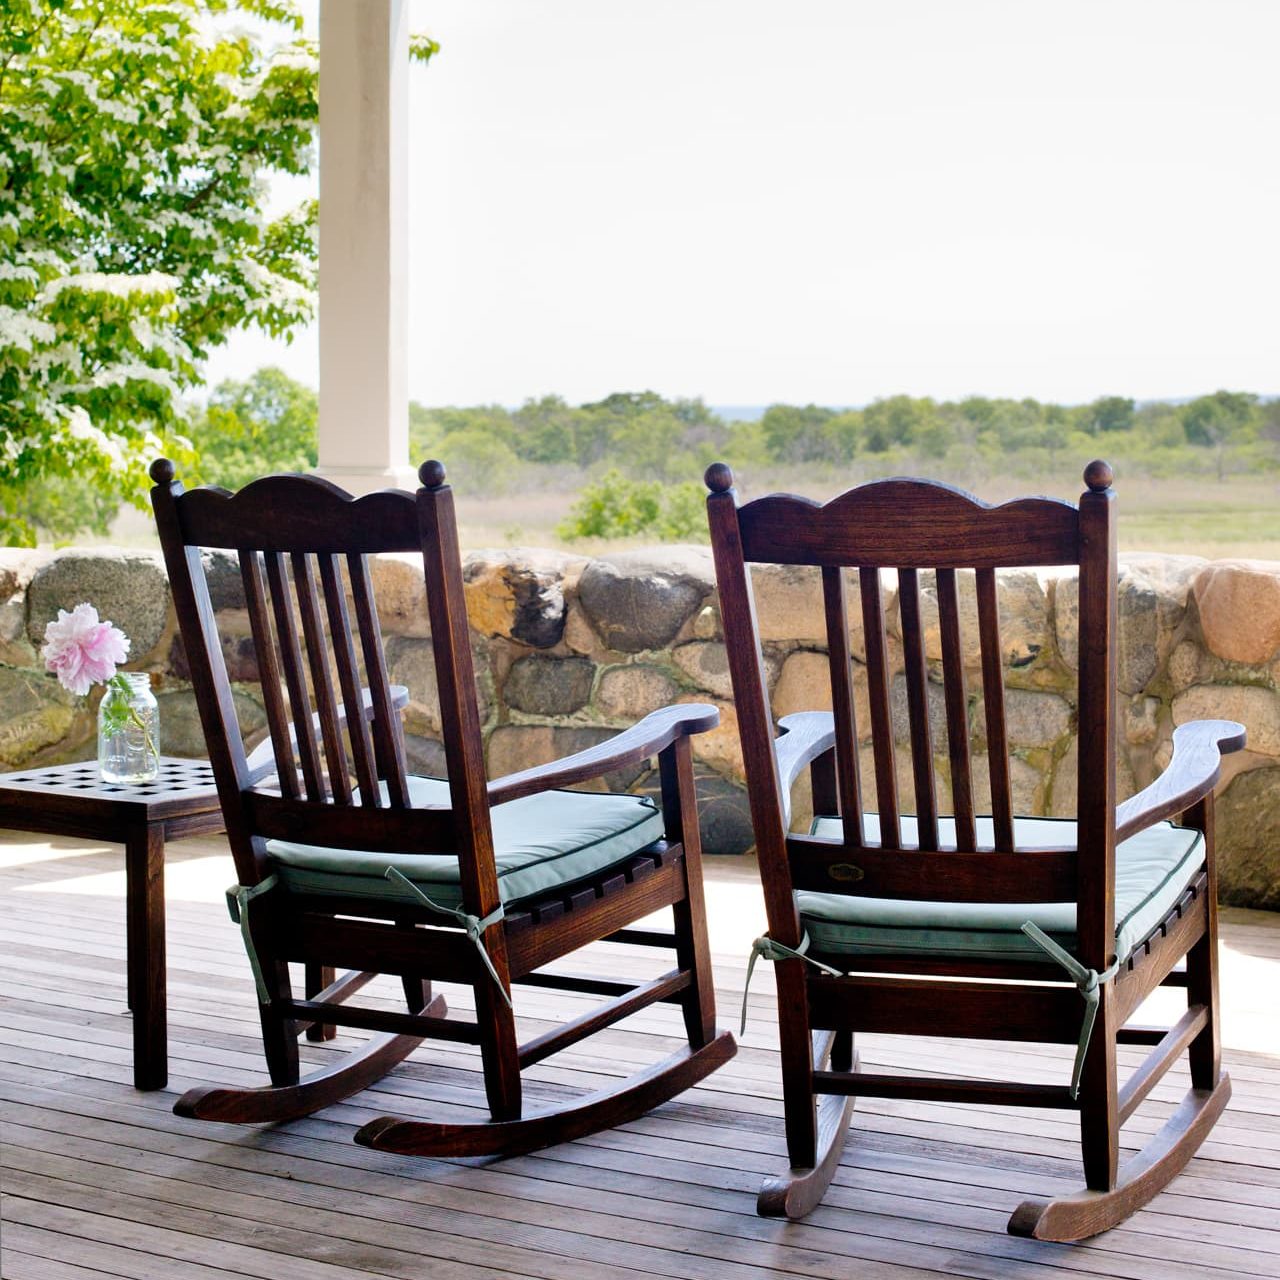 Rocking chairs on the porch with view looking out to sea